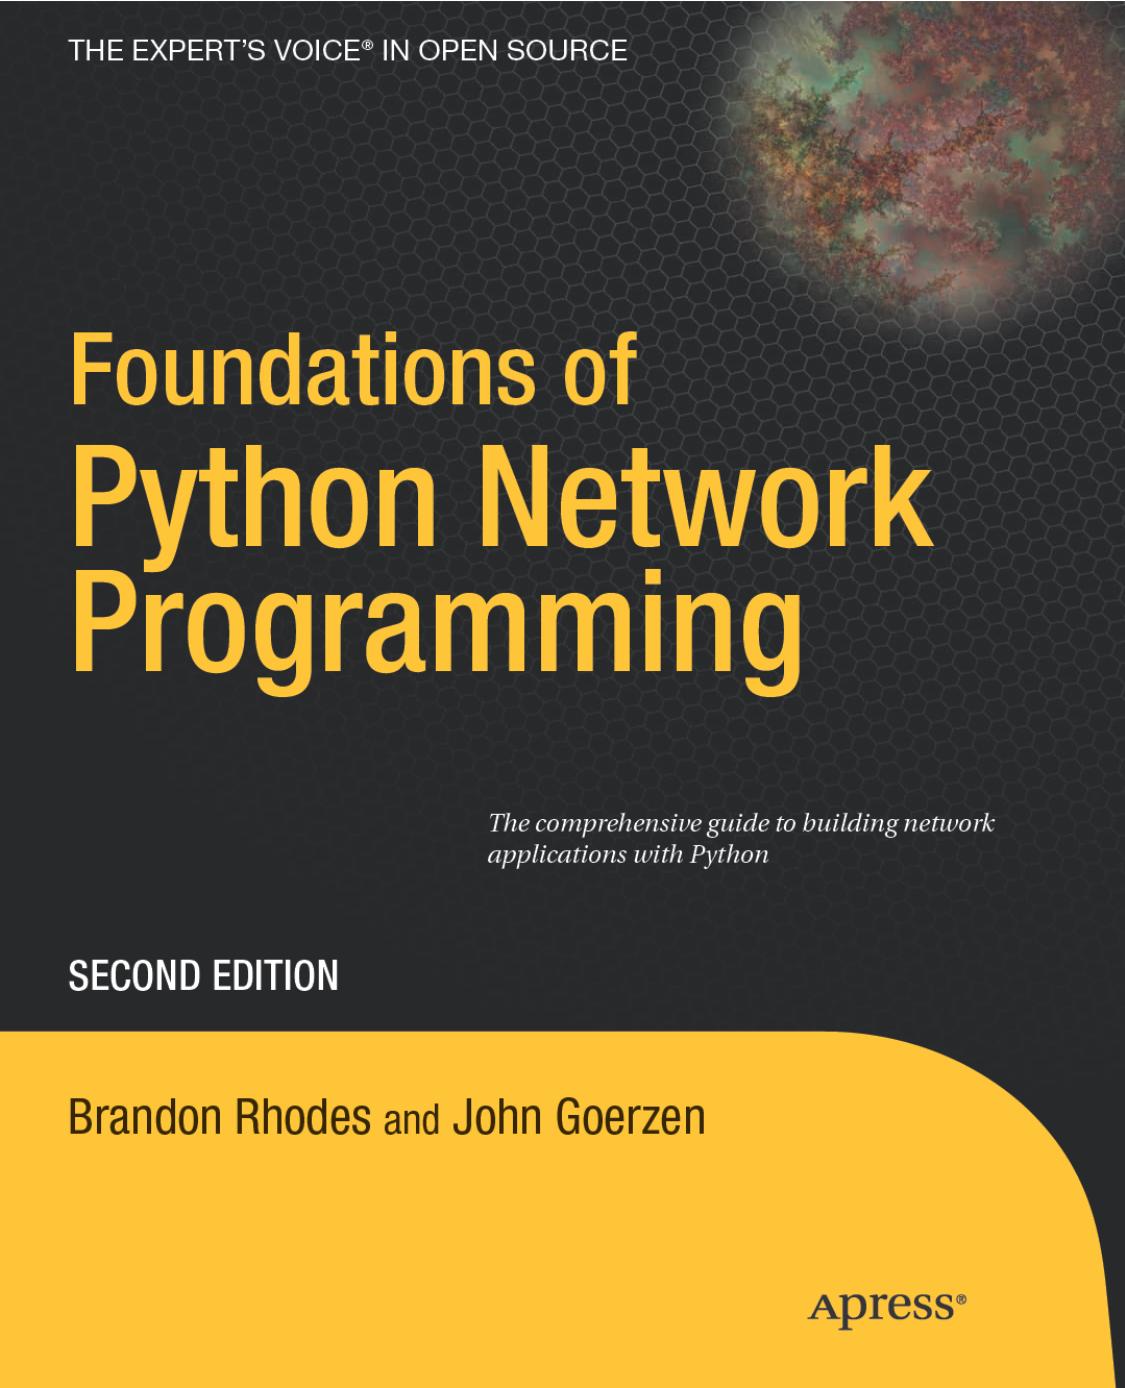 Foundations of Python Network Programming The comprehensive guide to building network applications with Python by John Goerzen, Brandon Rhodes